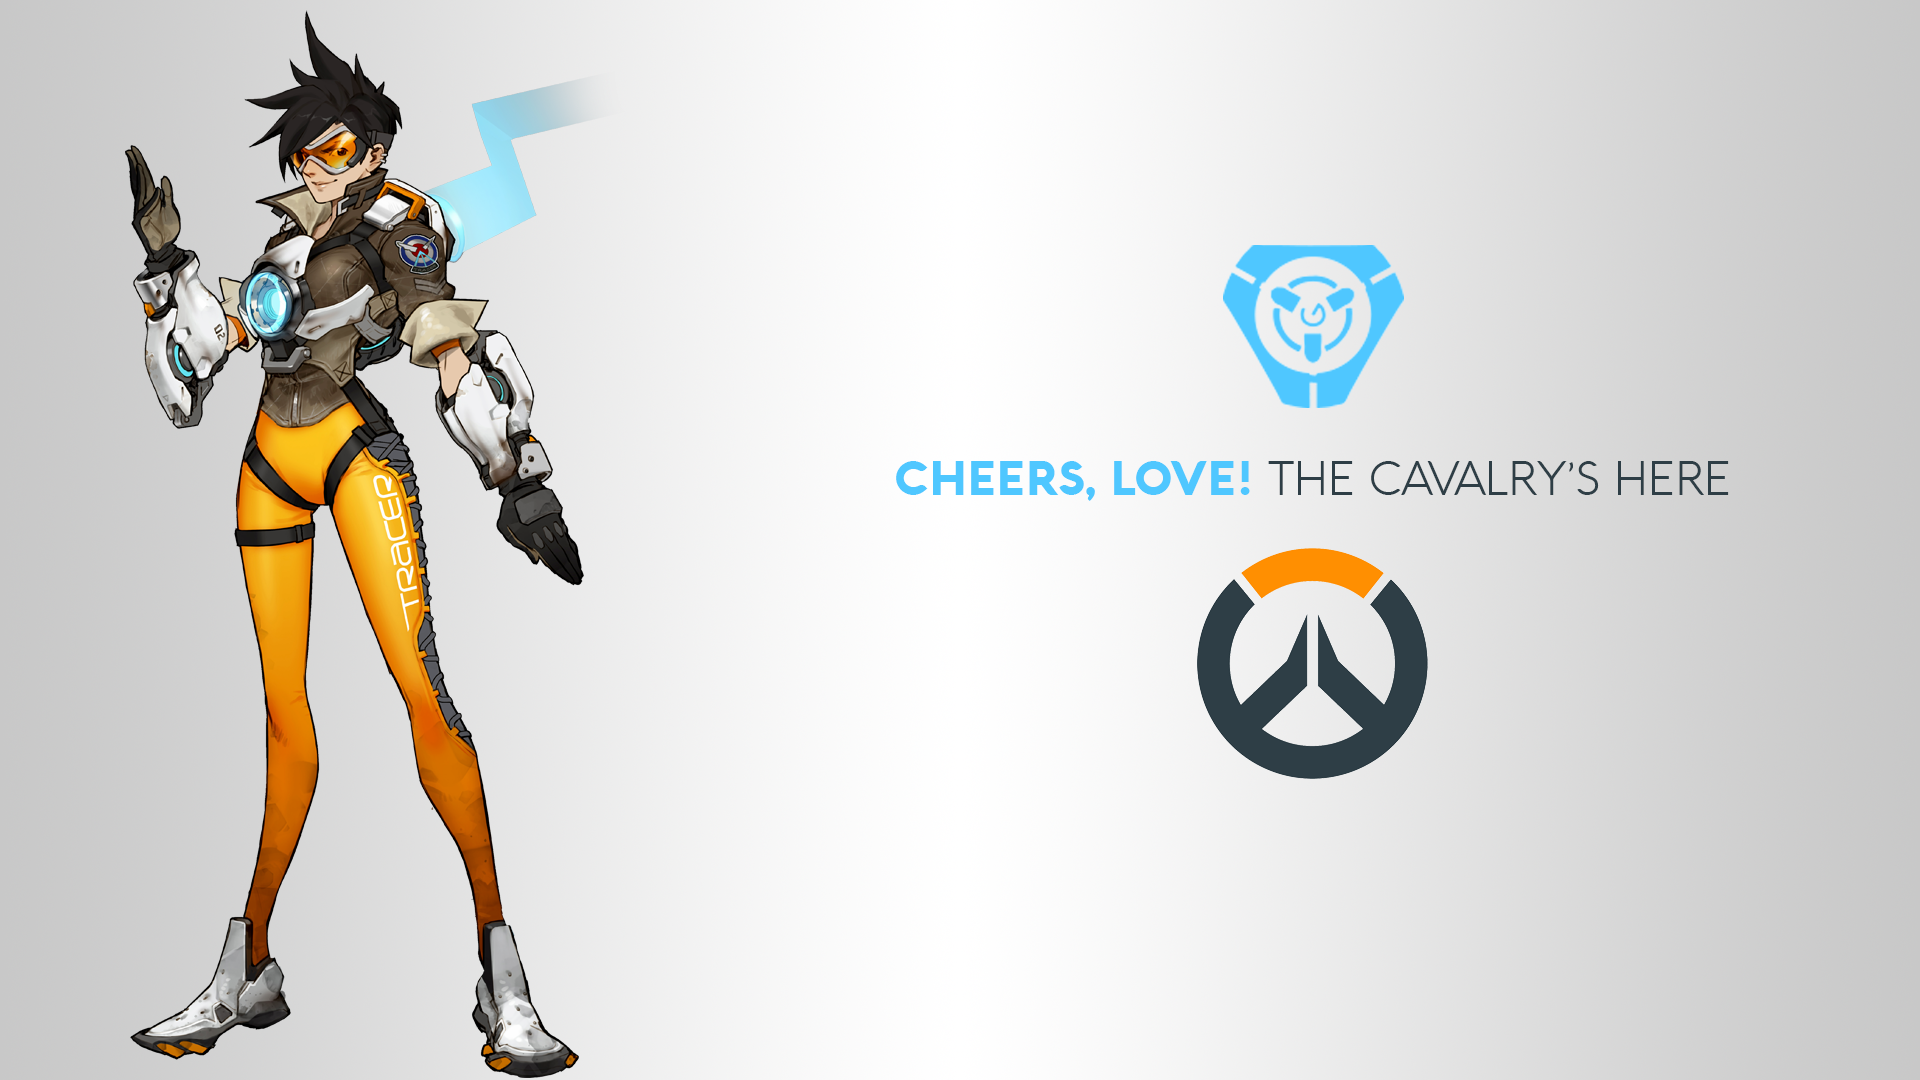 General 1920x1080 Blizzard Entertainment Overwatch video games logo DXHHH101 (Author) Tracer (Overwatch) video game characters video game girls PC gaming simple background